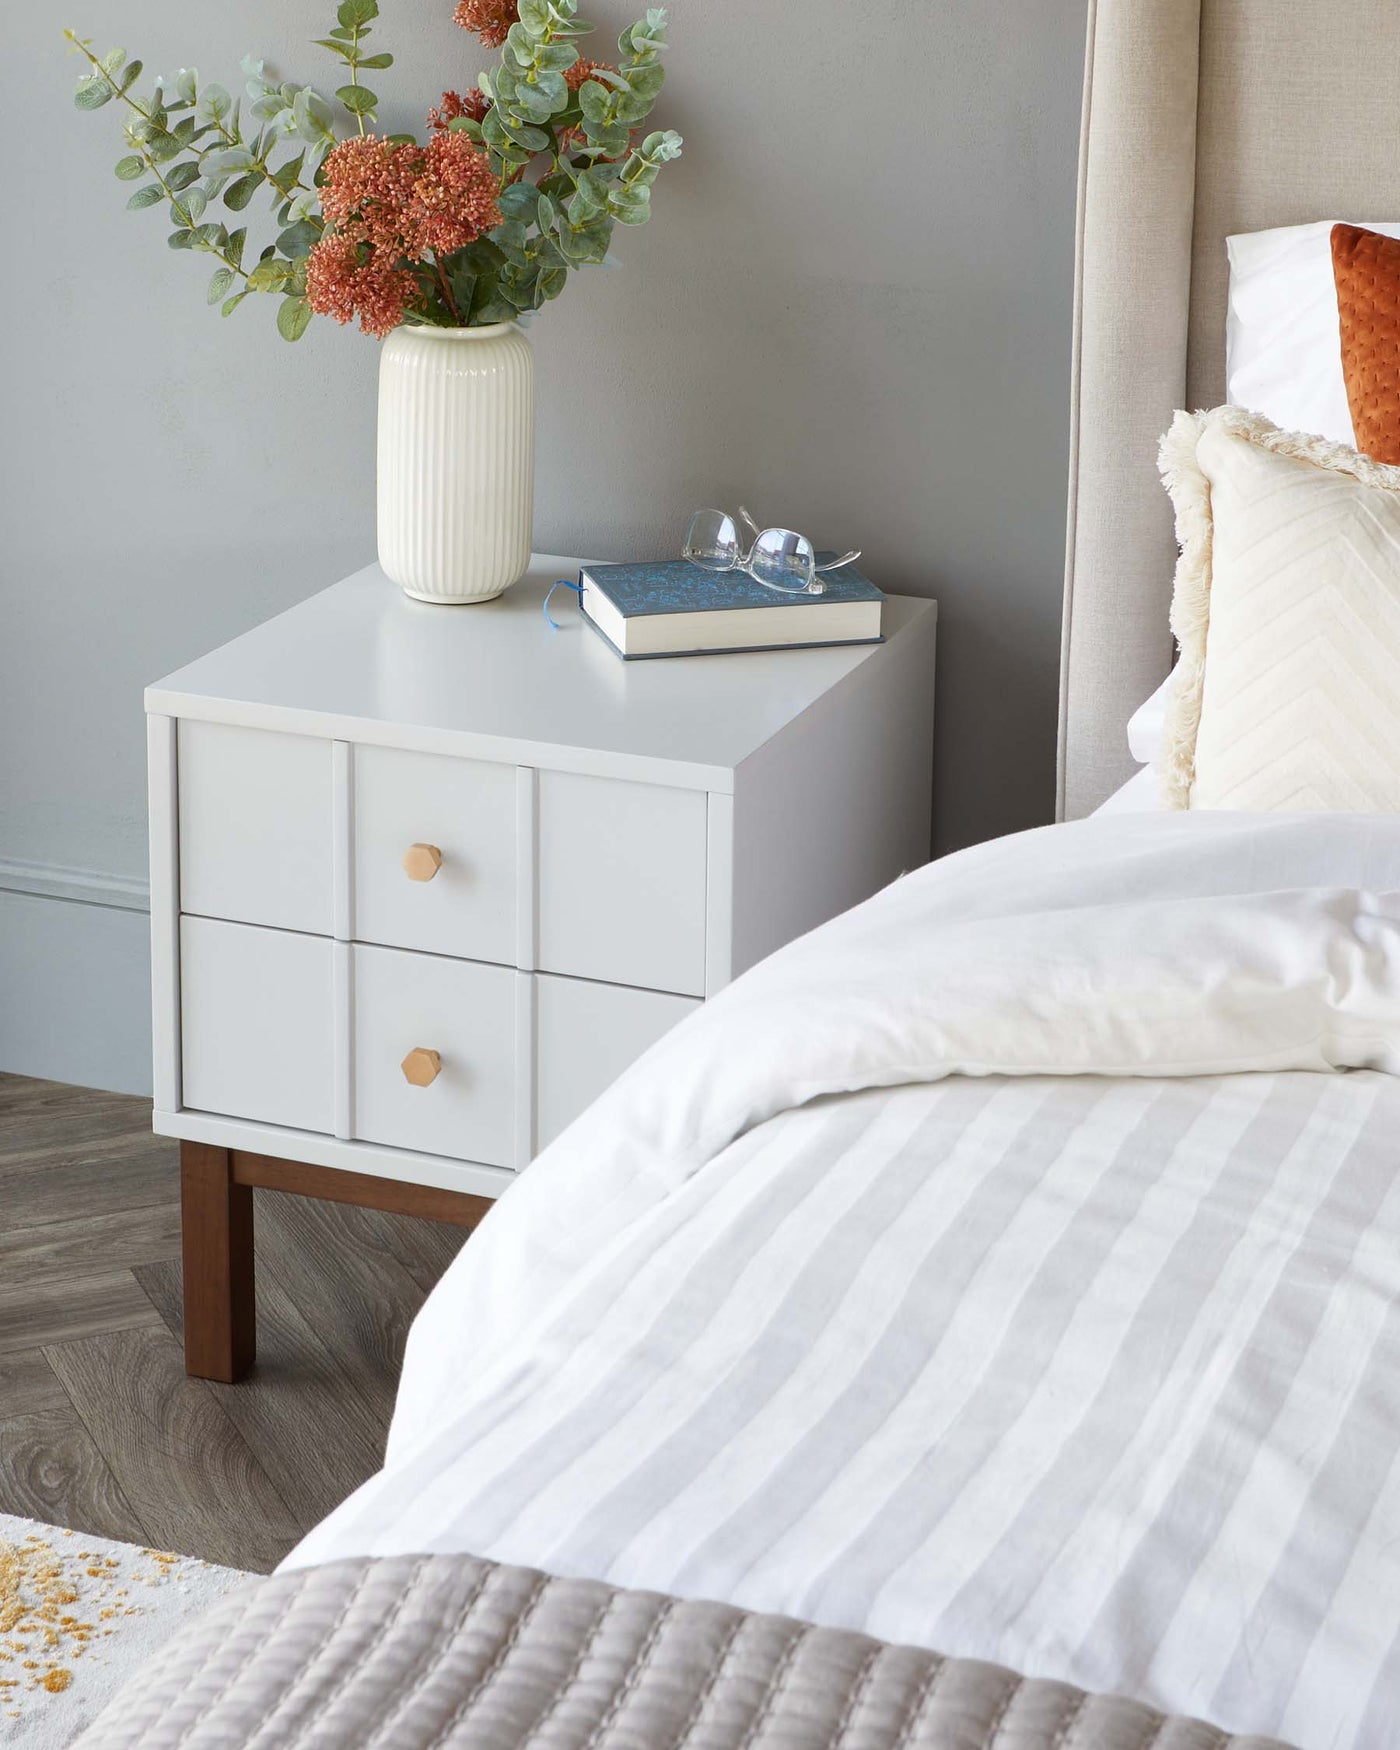 Modern white bedside table with three drawers featuring round wooden knobs, set against a grey wall, next to a bed with striped bedding.